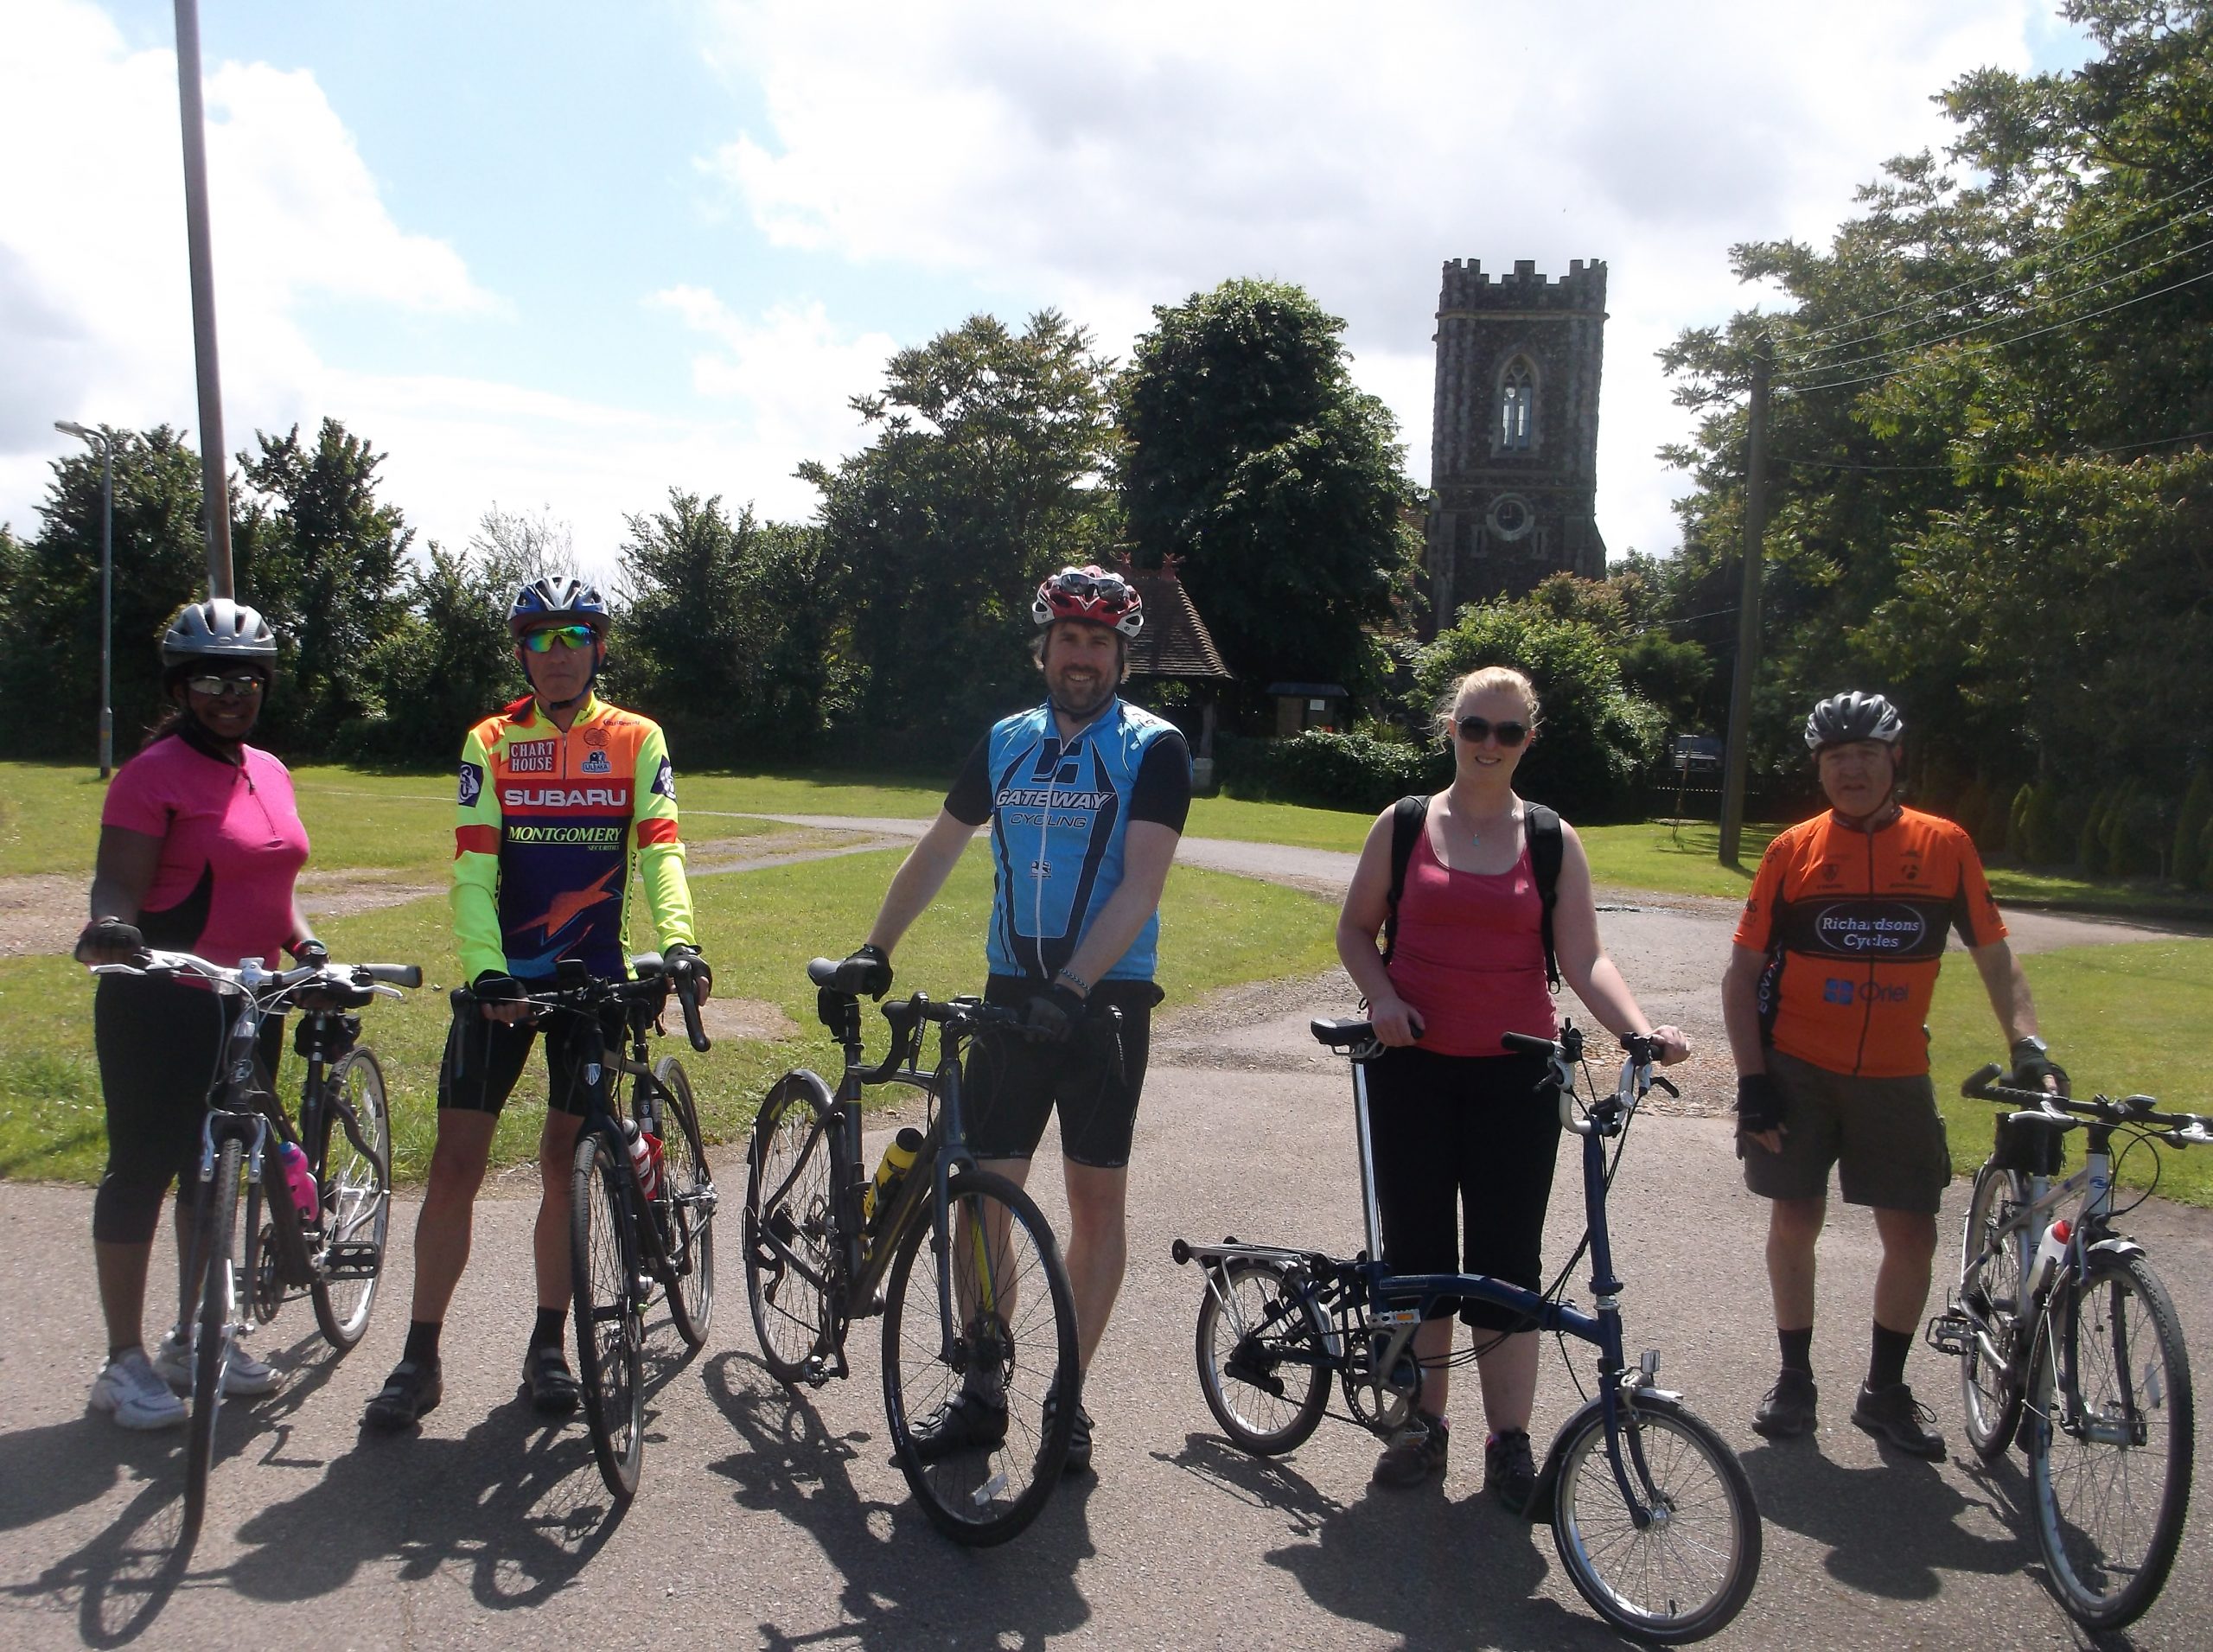 Recreation Ride to Thameside Nature Park – Saturday 7th June